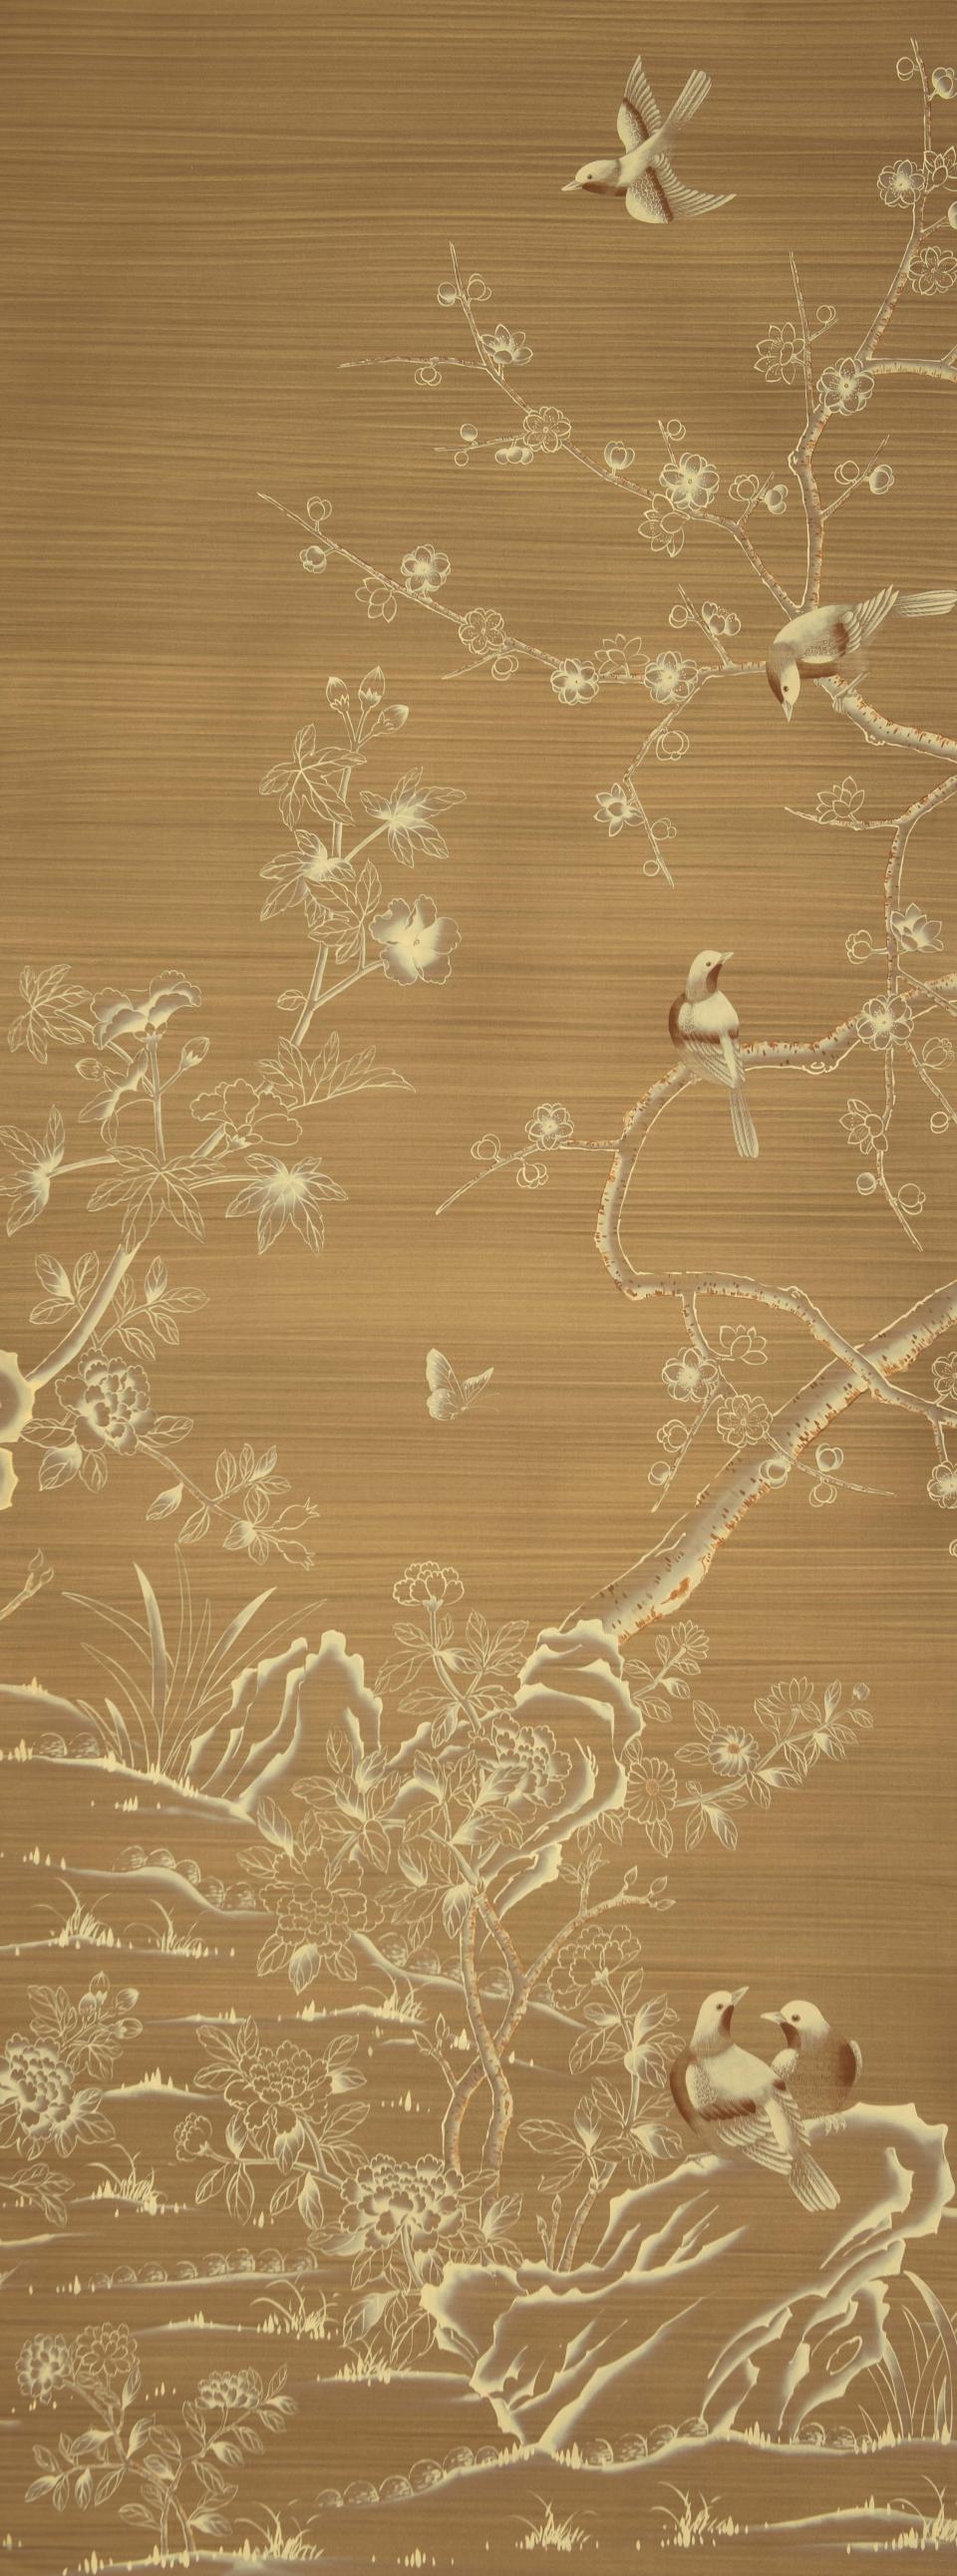 Folly by Fromental